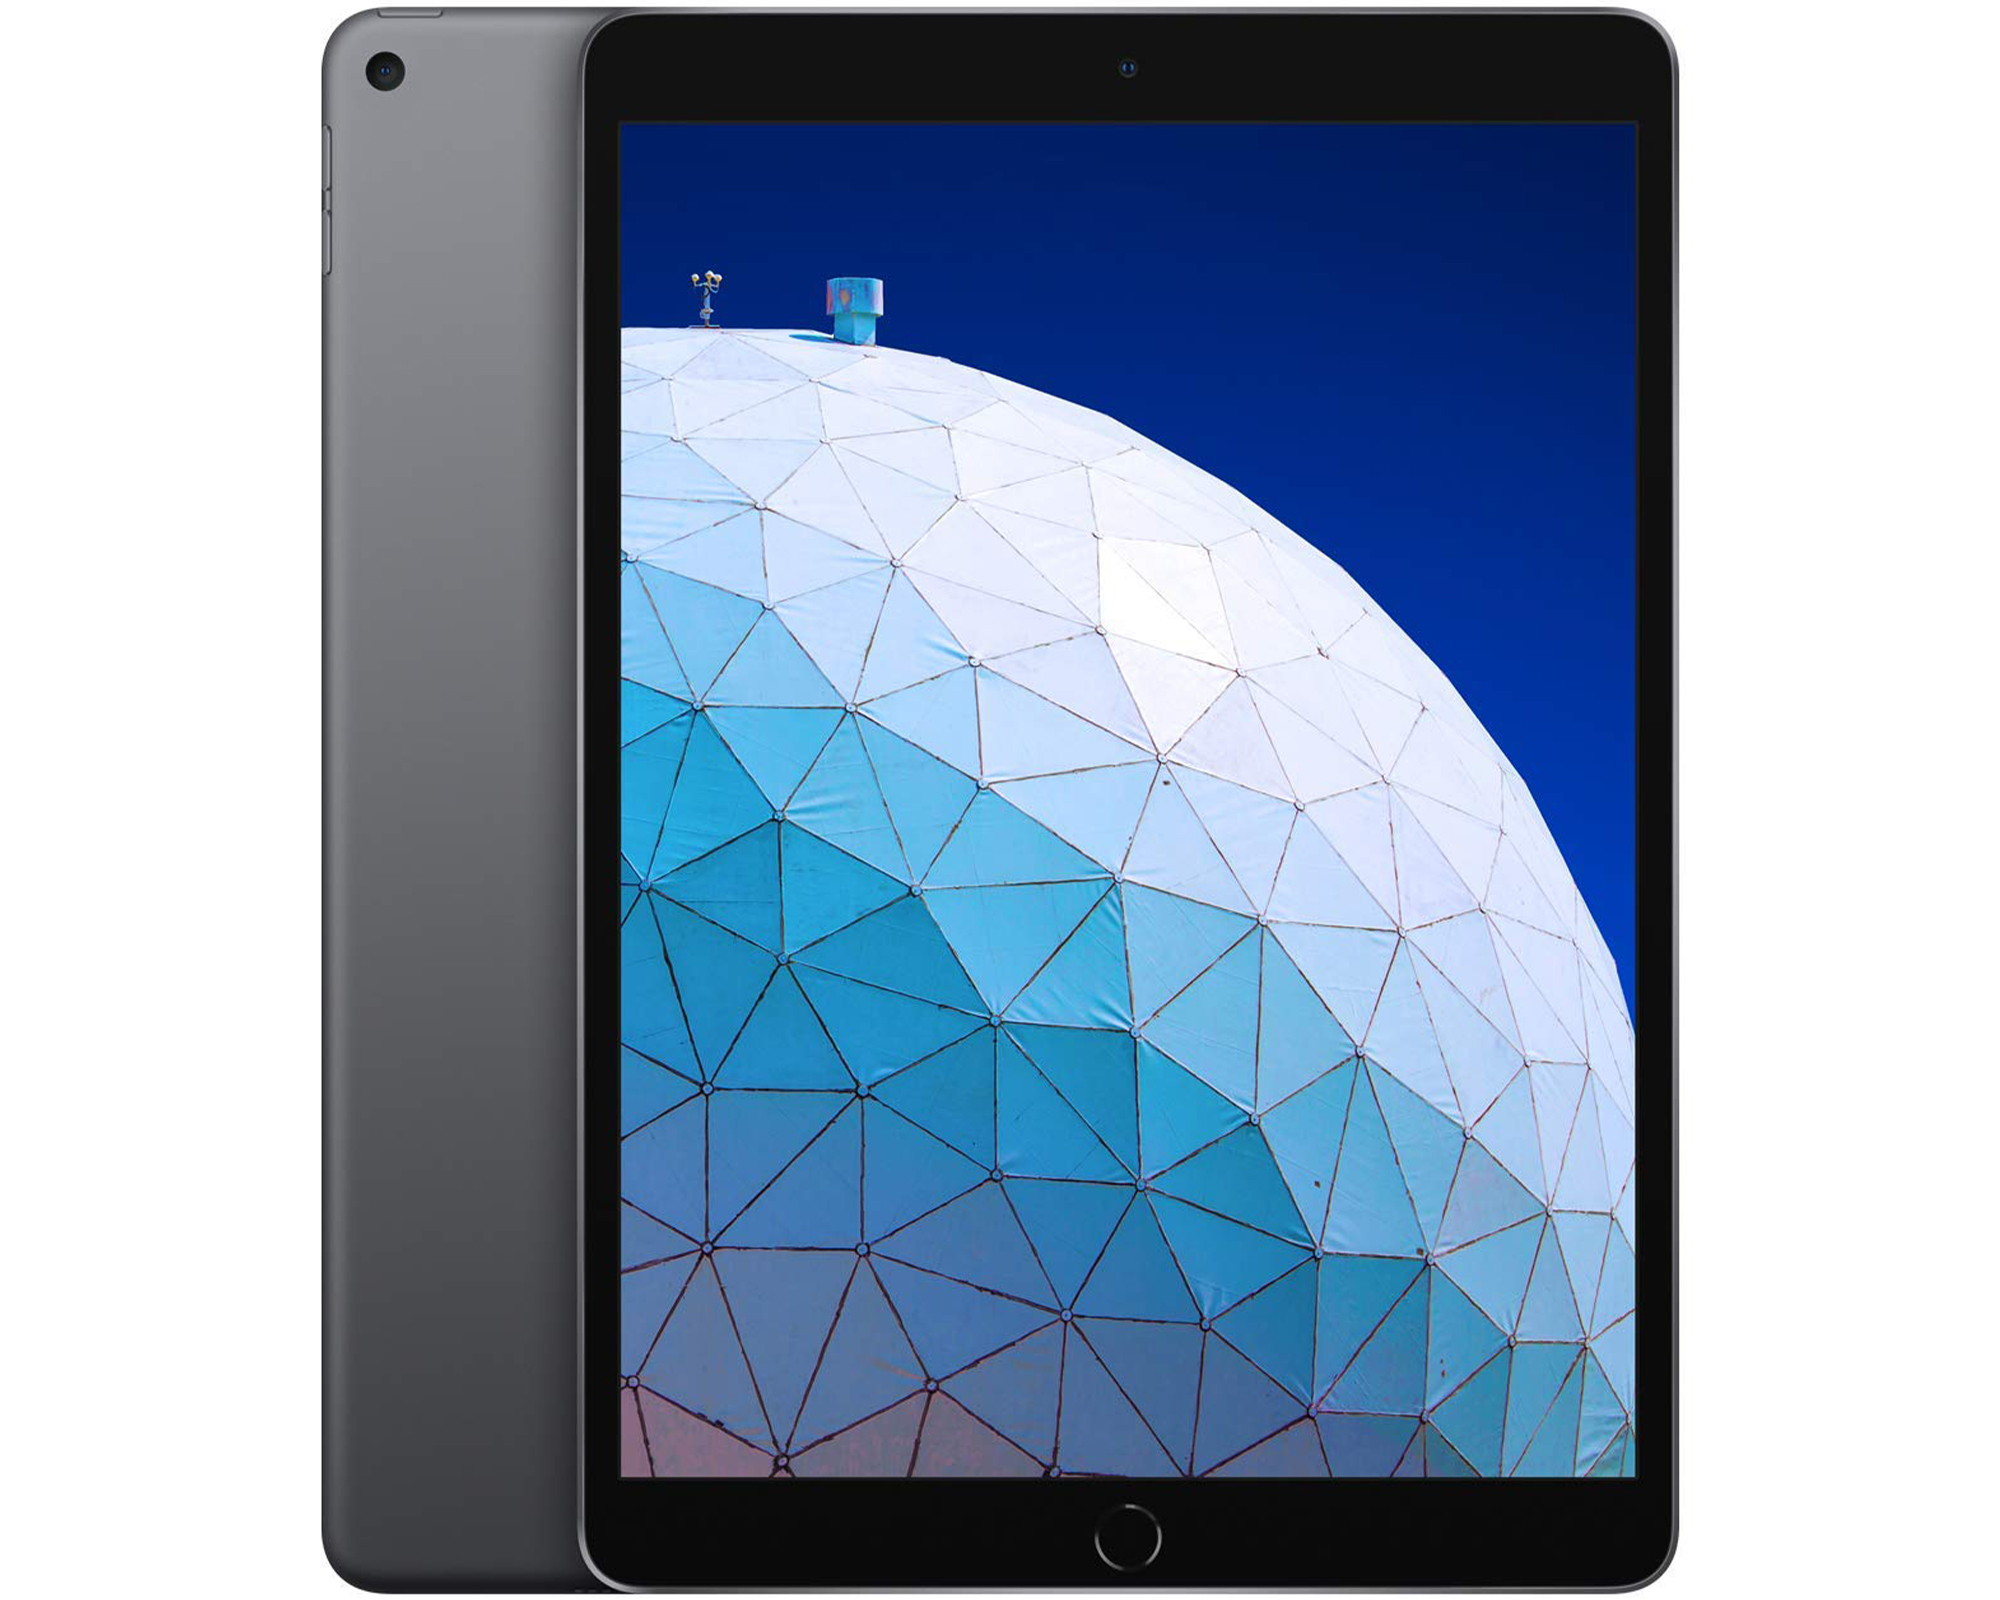 Restored Apple iPad Air 2 9.7-inch Space Gray Wi-Fi Only 64GB Bundle: Case, Pre-Installed Tempered Glass, Rapid Charger, Bluetooth/Wireless Airbuds By Certified 2 Day Express (Refurbished) - image 4 of 8